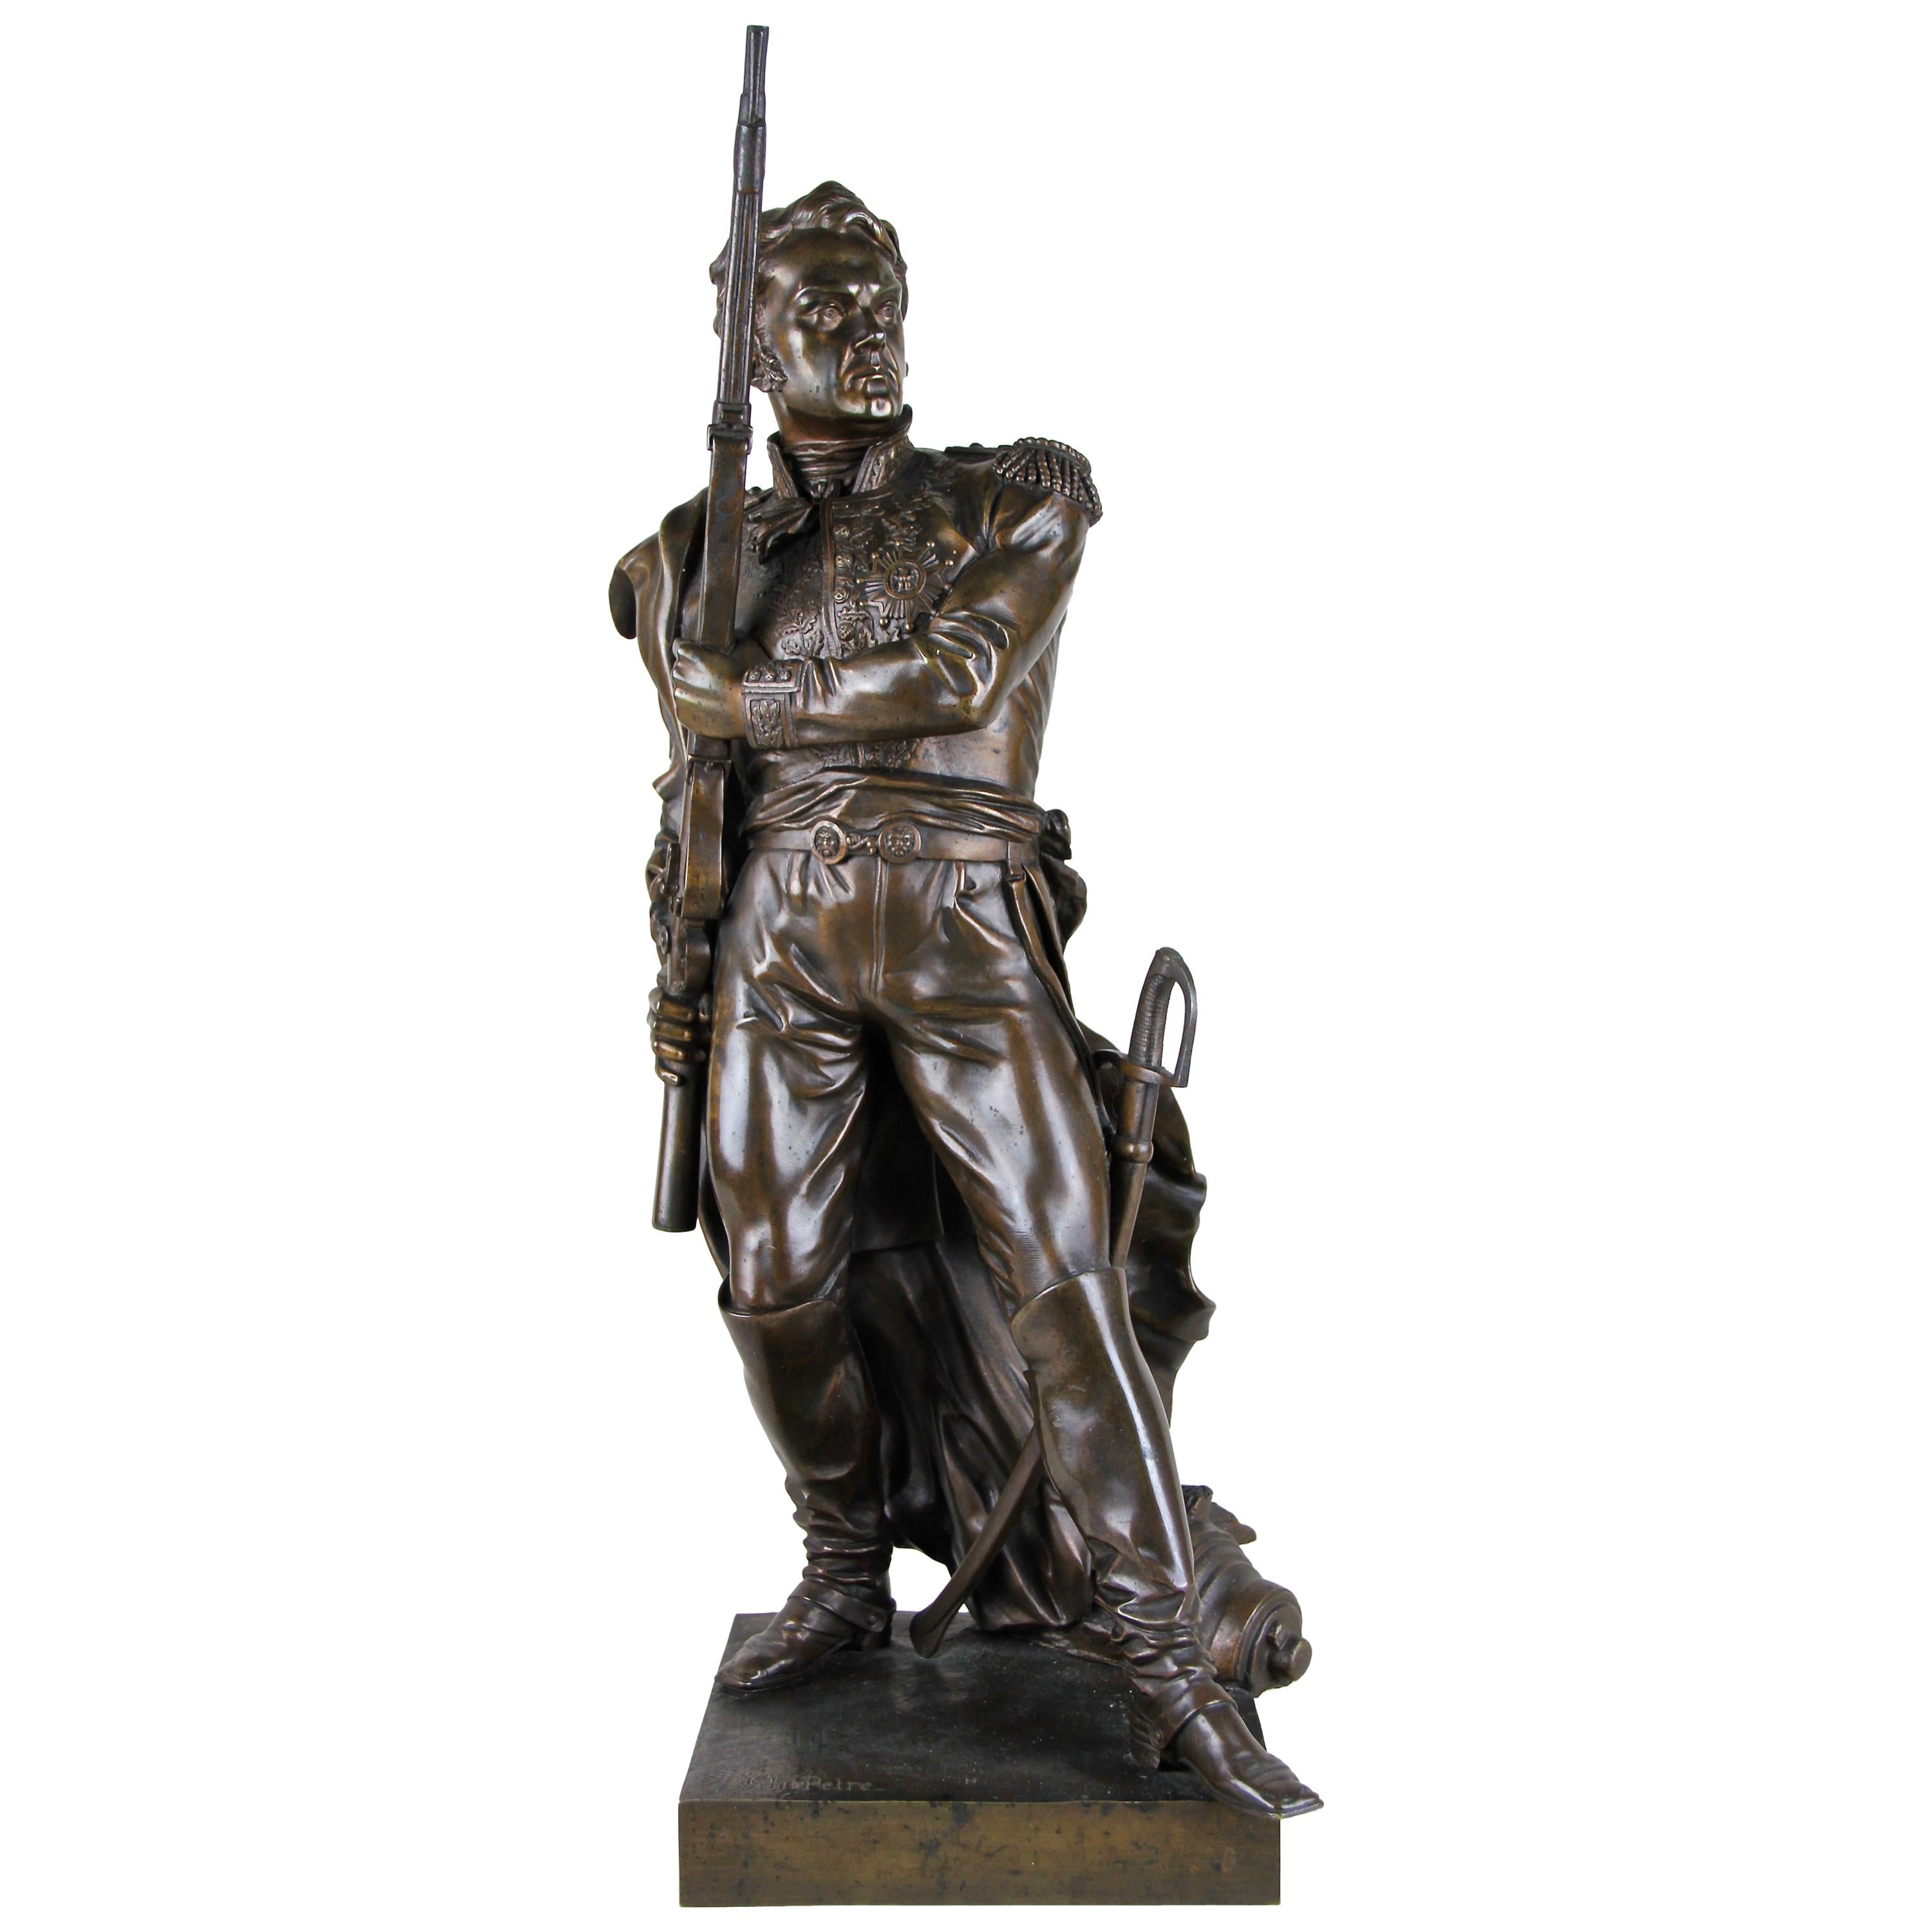 Bronze Sculpture "Soldier" by Charles Petre, France, circa 1870